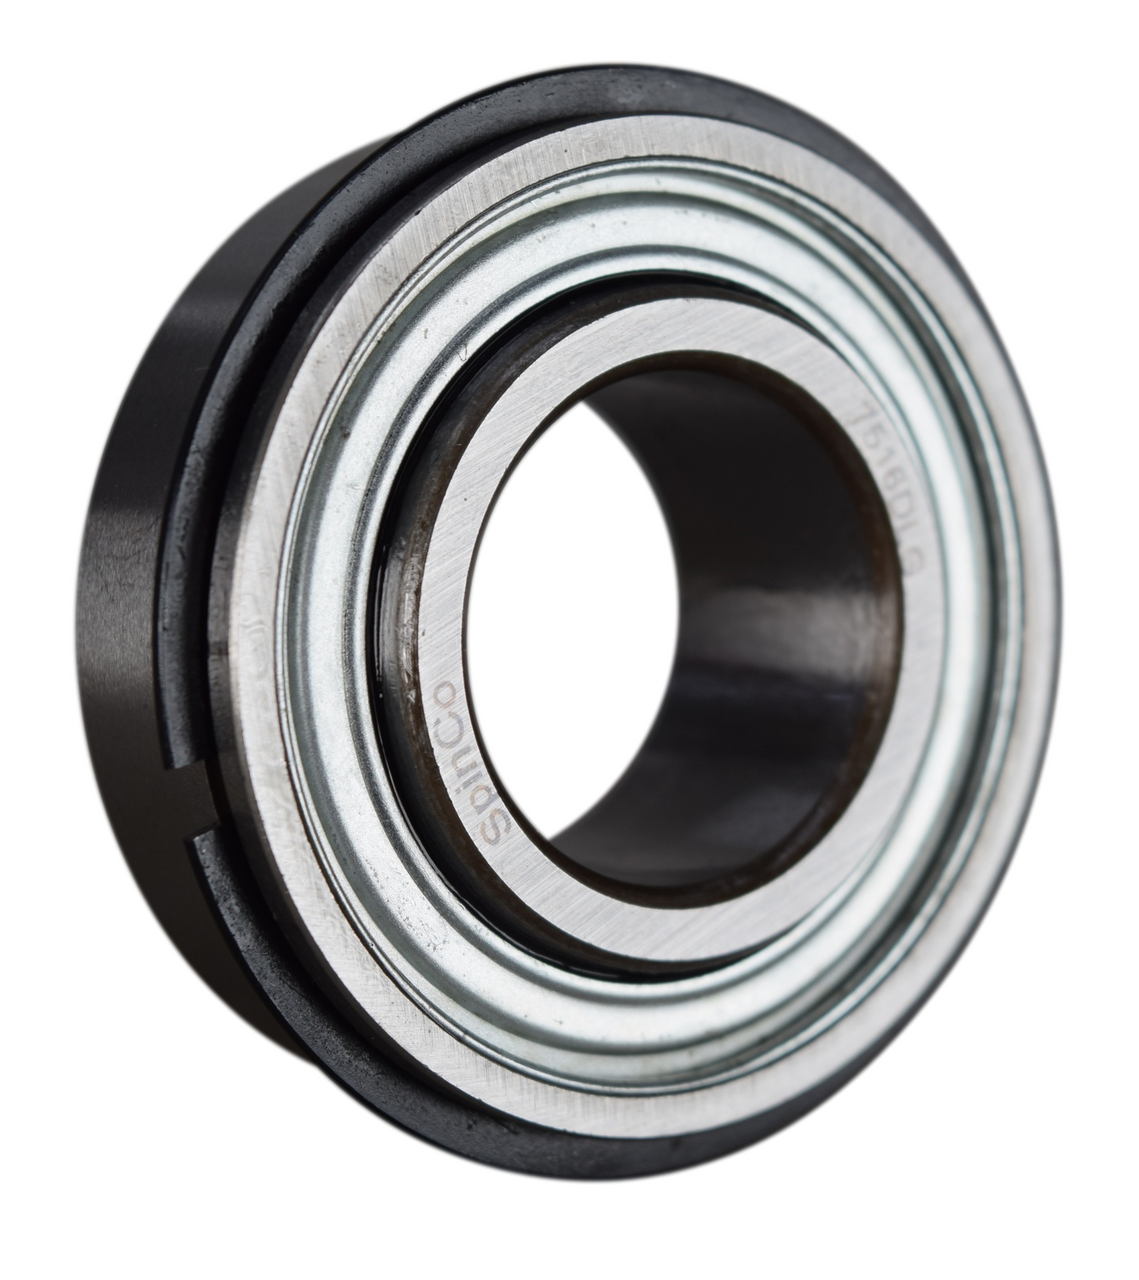 7510DLG GENERIC 0.625x1.75x0.625/.75 Normal duty bearing insert with a parallel outer race with snap ring and groove - Imperial Thumbnail